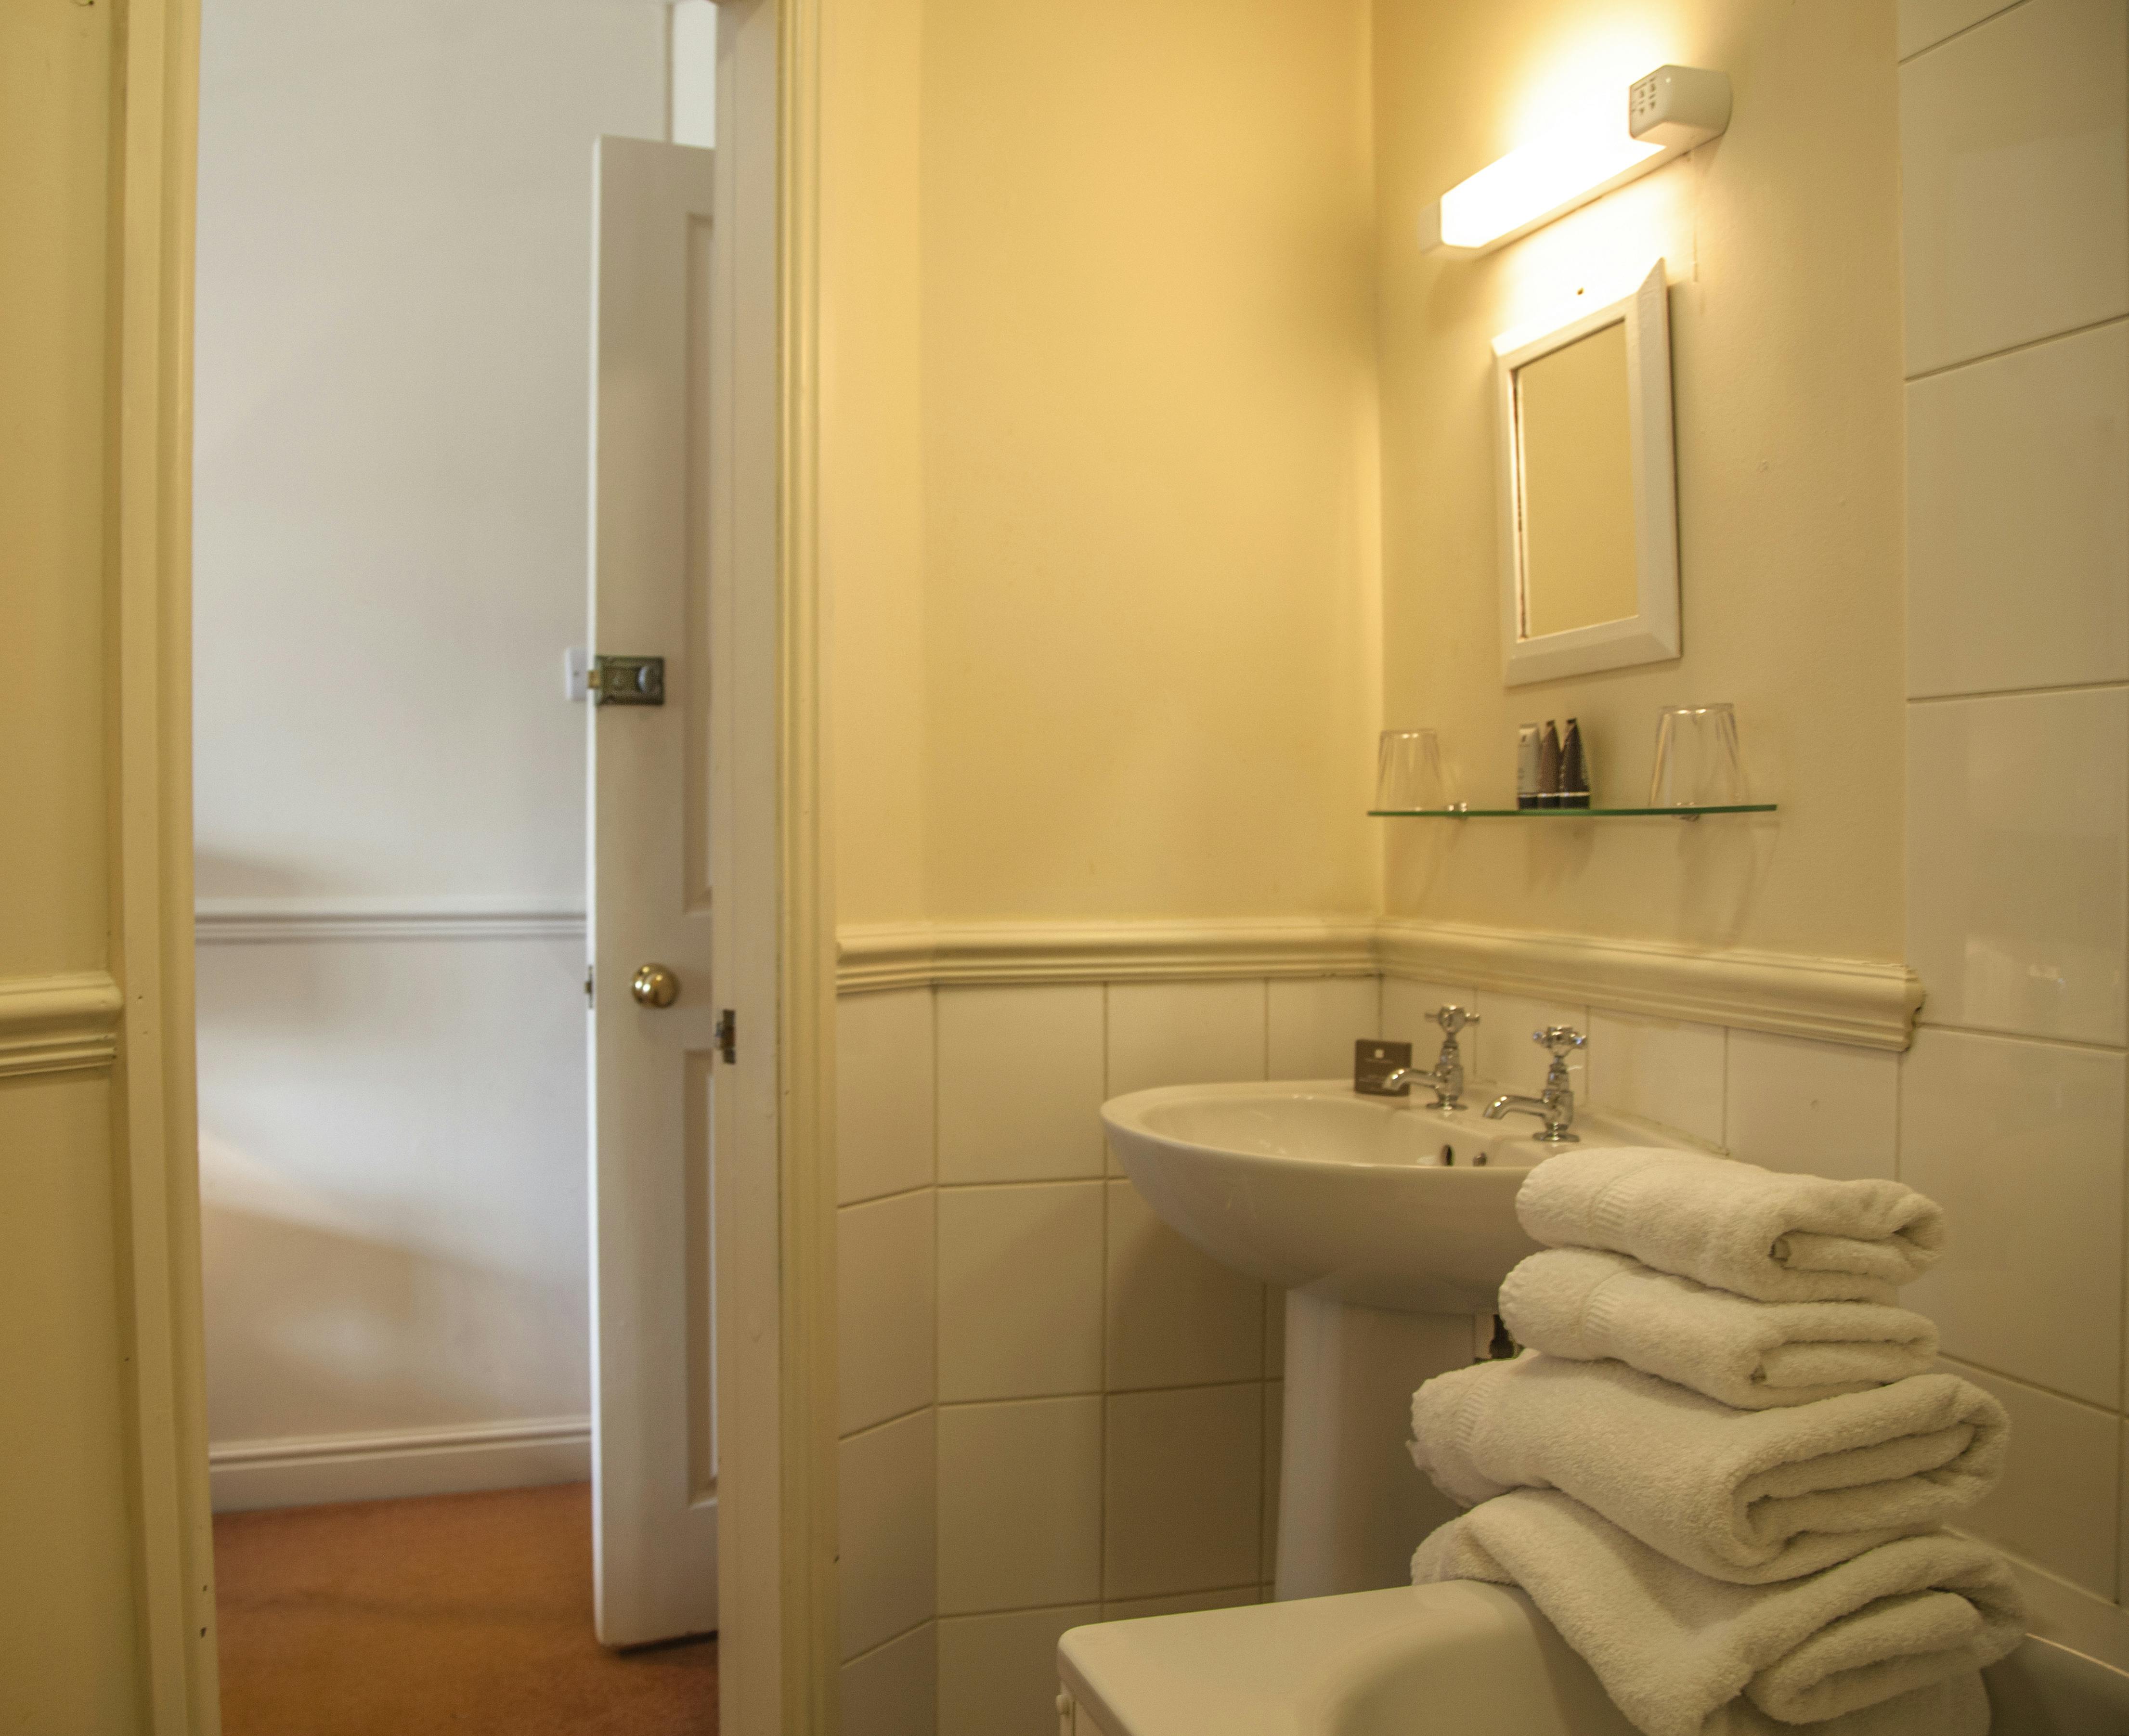 Bathroom at The Wensleydale Hotel, Middleham, offers boutique accommodation in the heart of the Yorkshire Dales